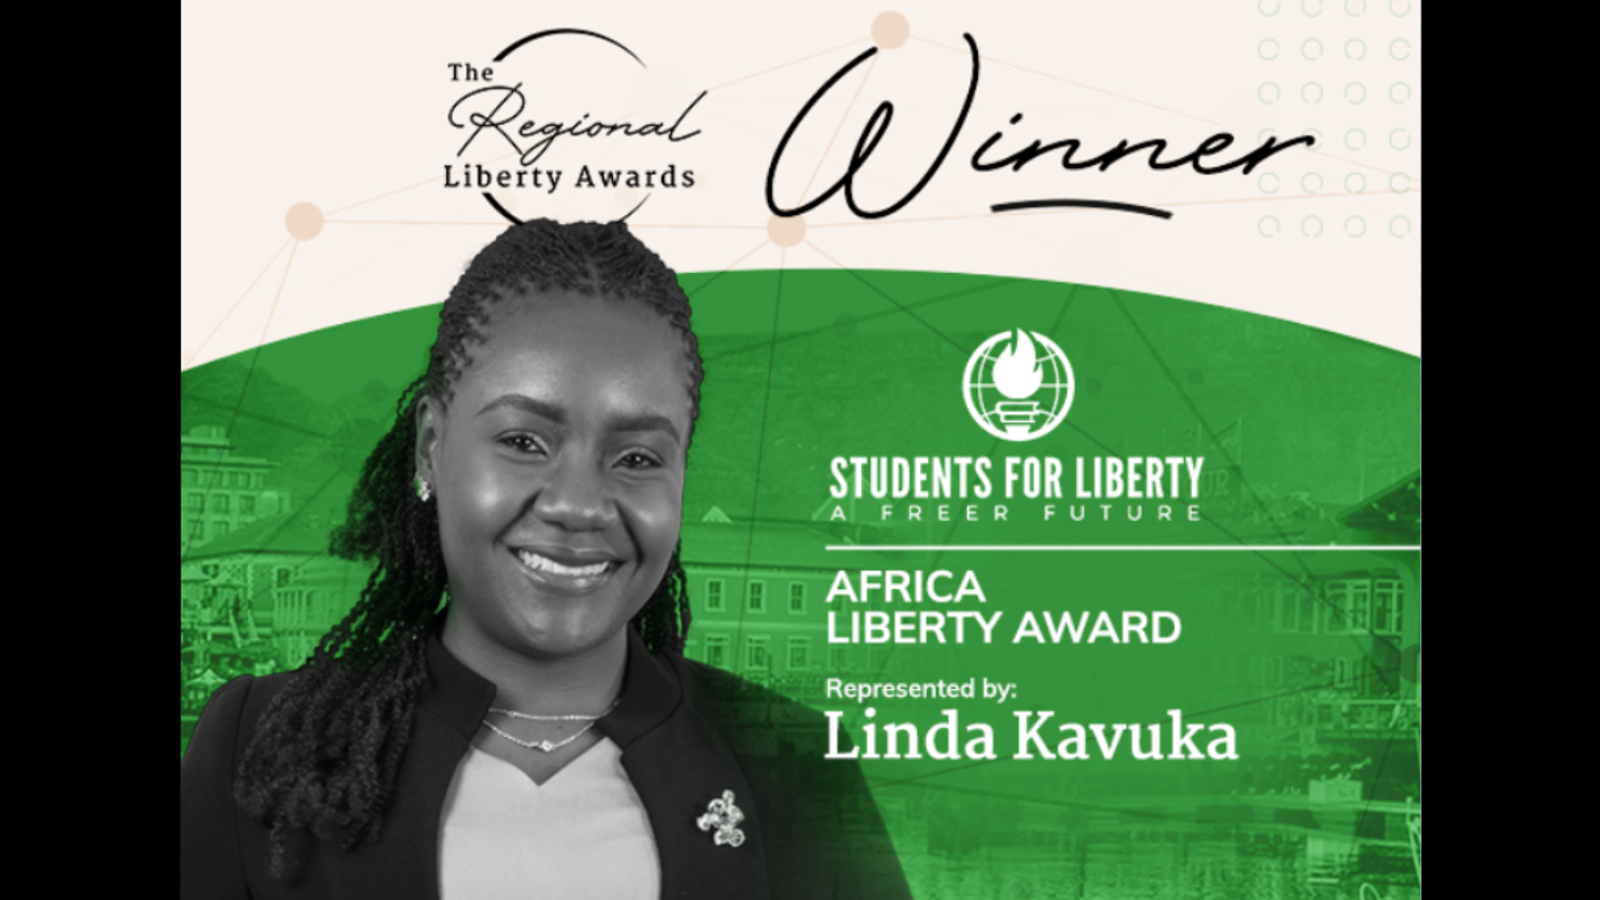 Students For Liberty has been honored with the prestigious 2023 Africa Liberty Award, presented by Atlas Network at the Africa Liberty Forum